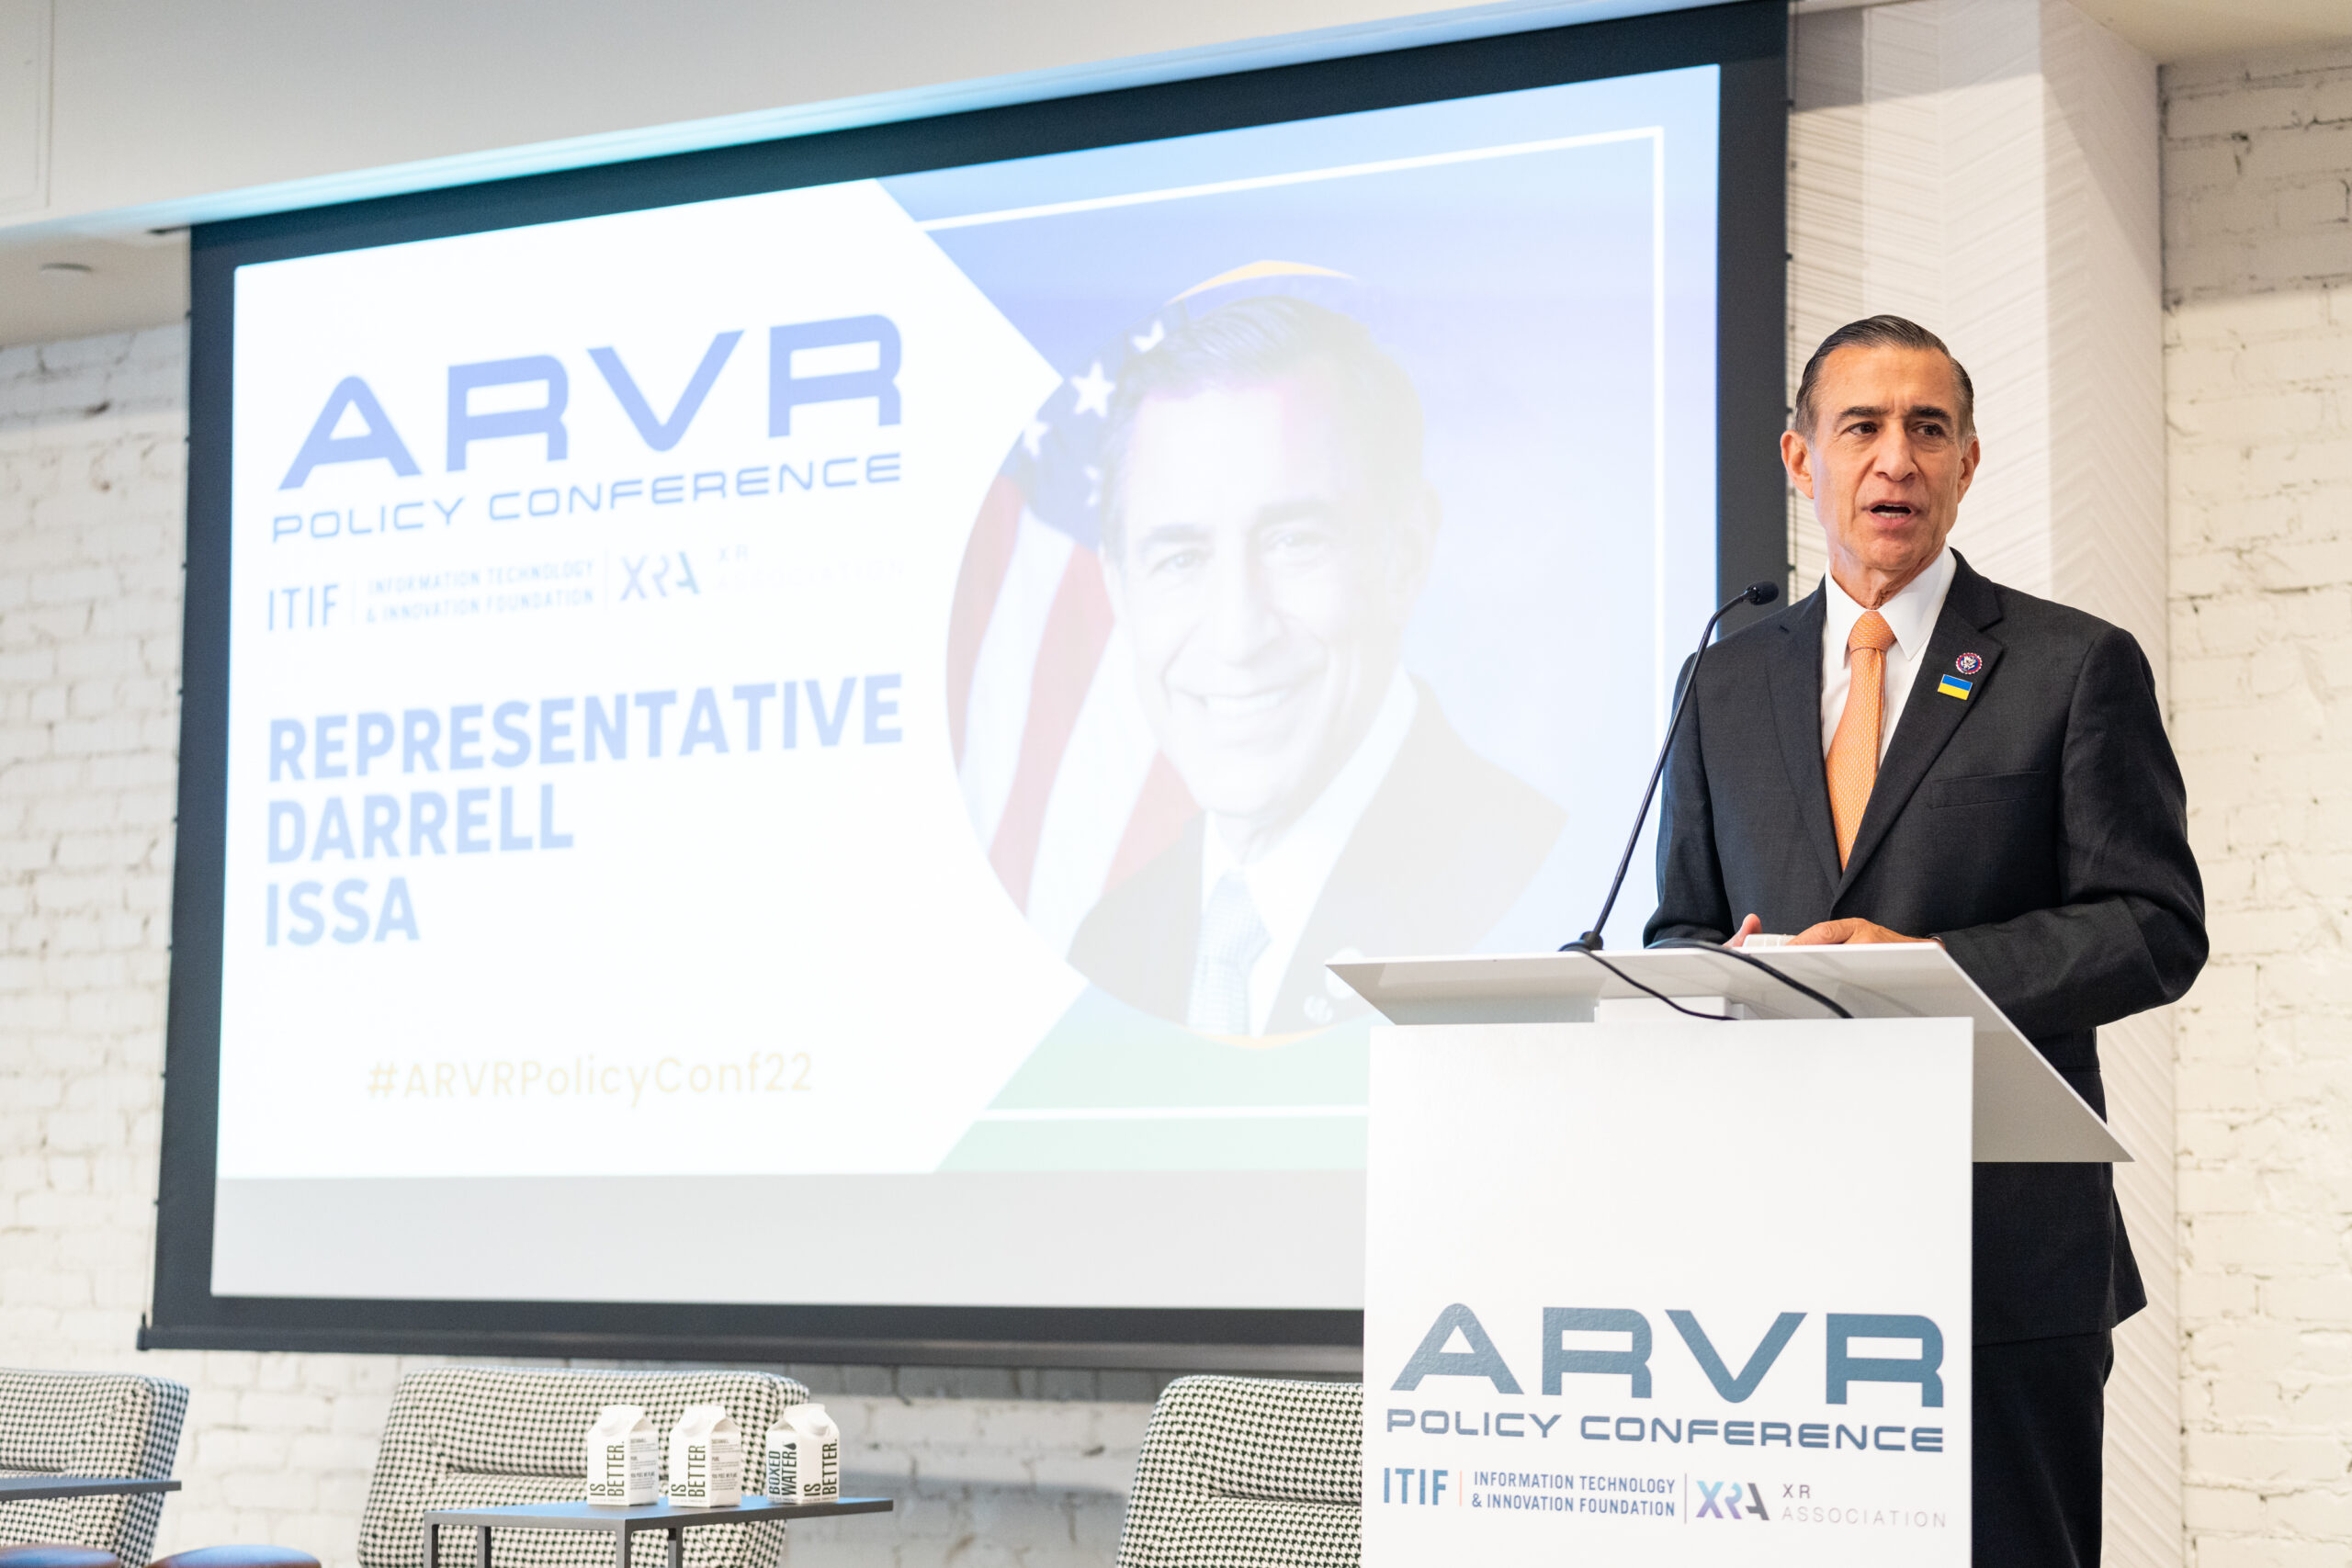 XRA EXPLORES XR POLICY ISSUES, HIGHLIGHTS MEMBER COMPANIES AT ANNUAL AR/VR POLICY CONFERENCE IN WASHINGTON, DC